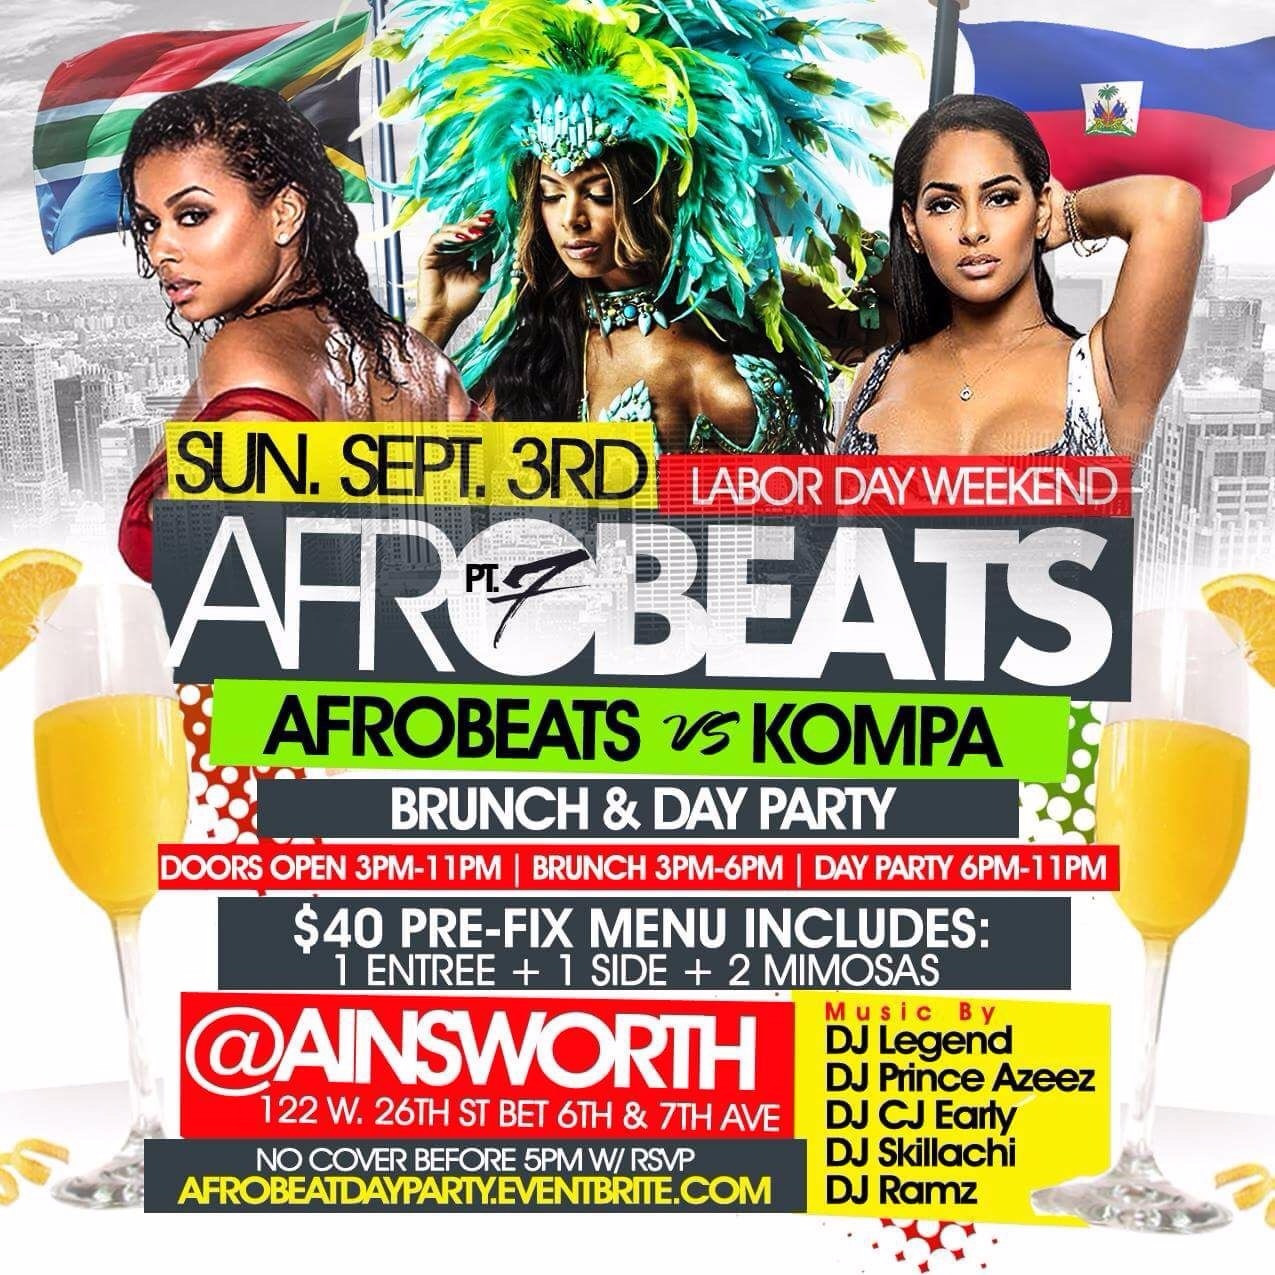 AFROBEAT pt. 7 Afrobeat vs Kompa Sun. Sept 3rd at Ainsworth Everyone FREE Before 5pm with RSVP